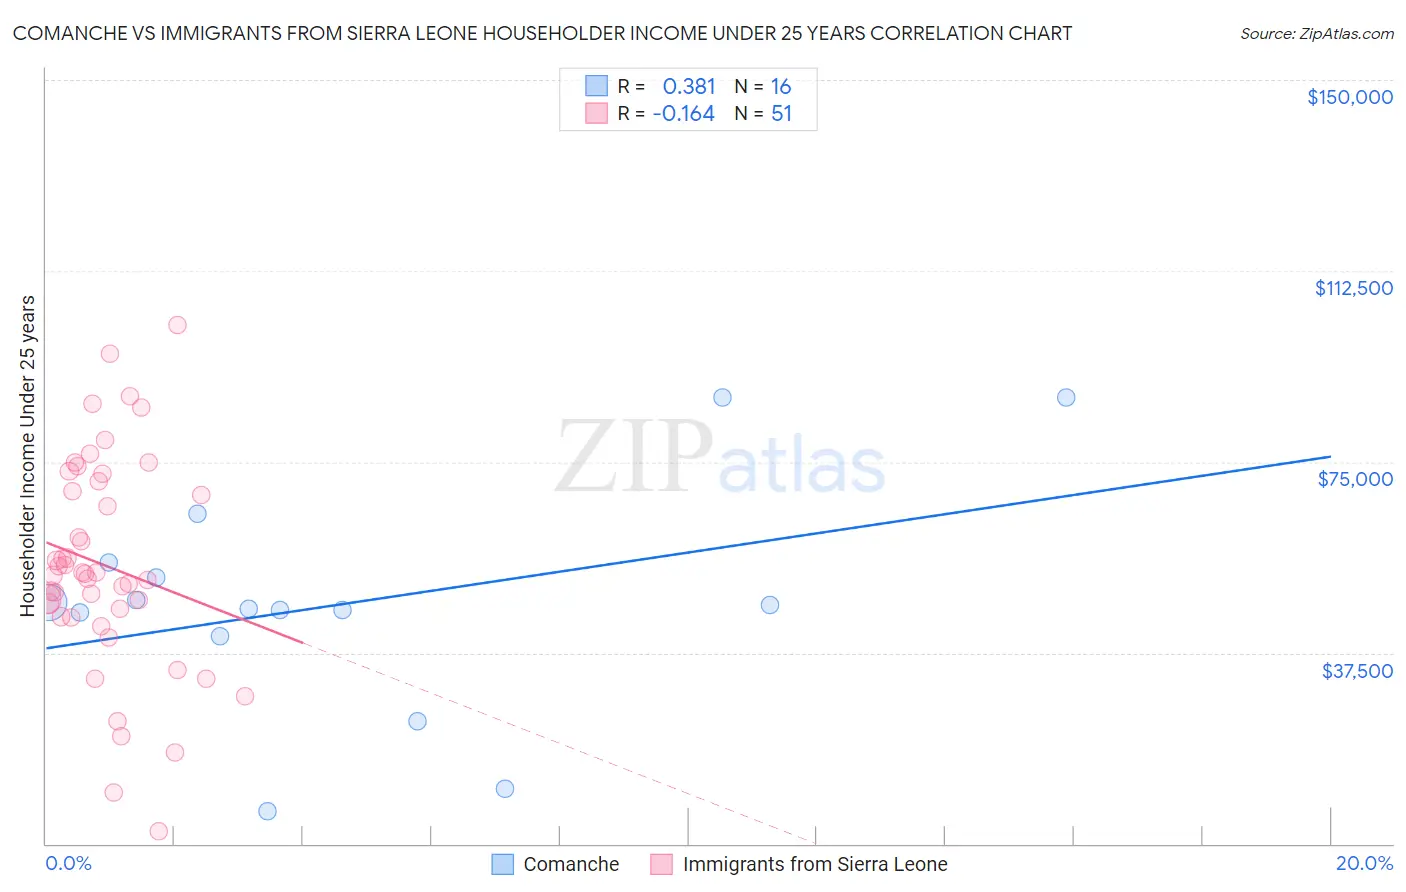 Comanche vs Immigrants from Sierra Leone Householder Income Under 25 years